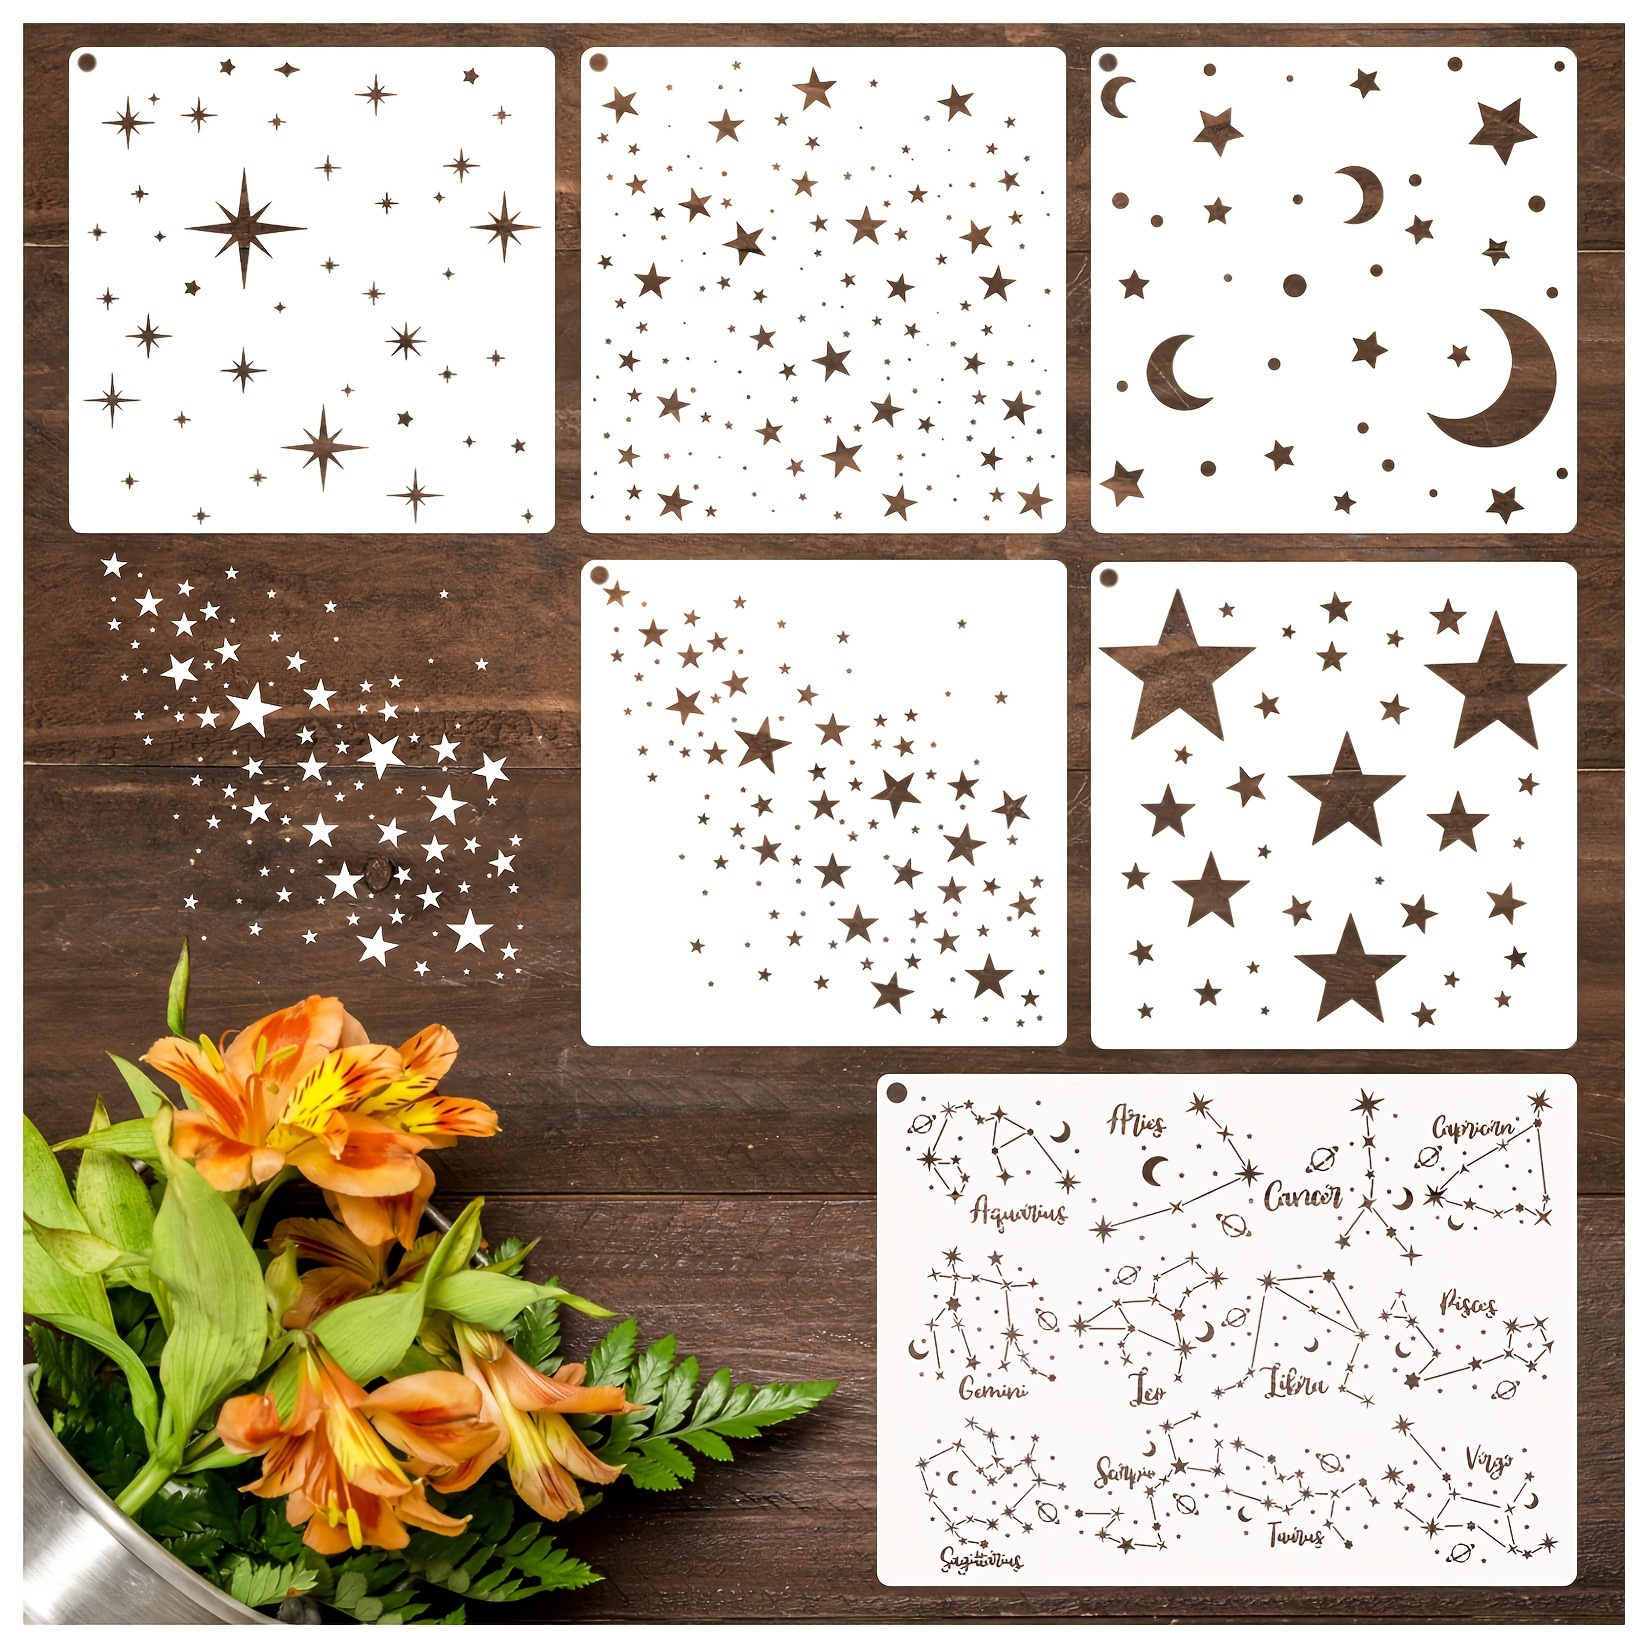 Star Wallpaper Wall Stencil, 2694 by Designer Stencils, Pattern Stencils, Reusable Stencils for Painting, Safe & Reusable Template for Wall Decor